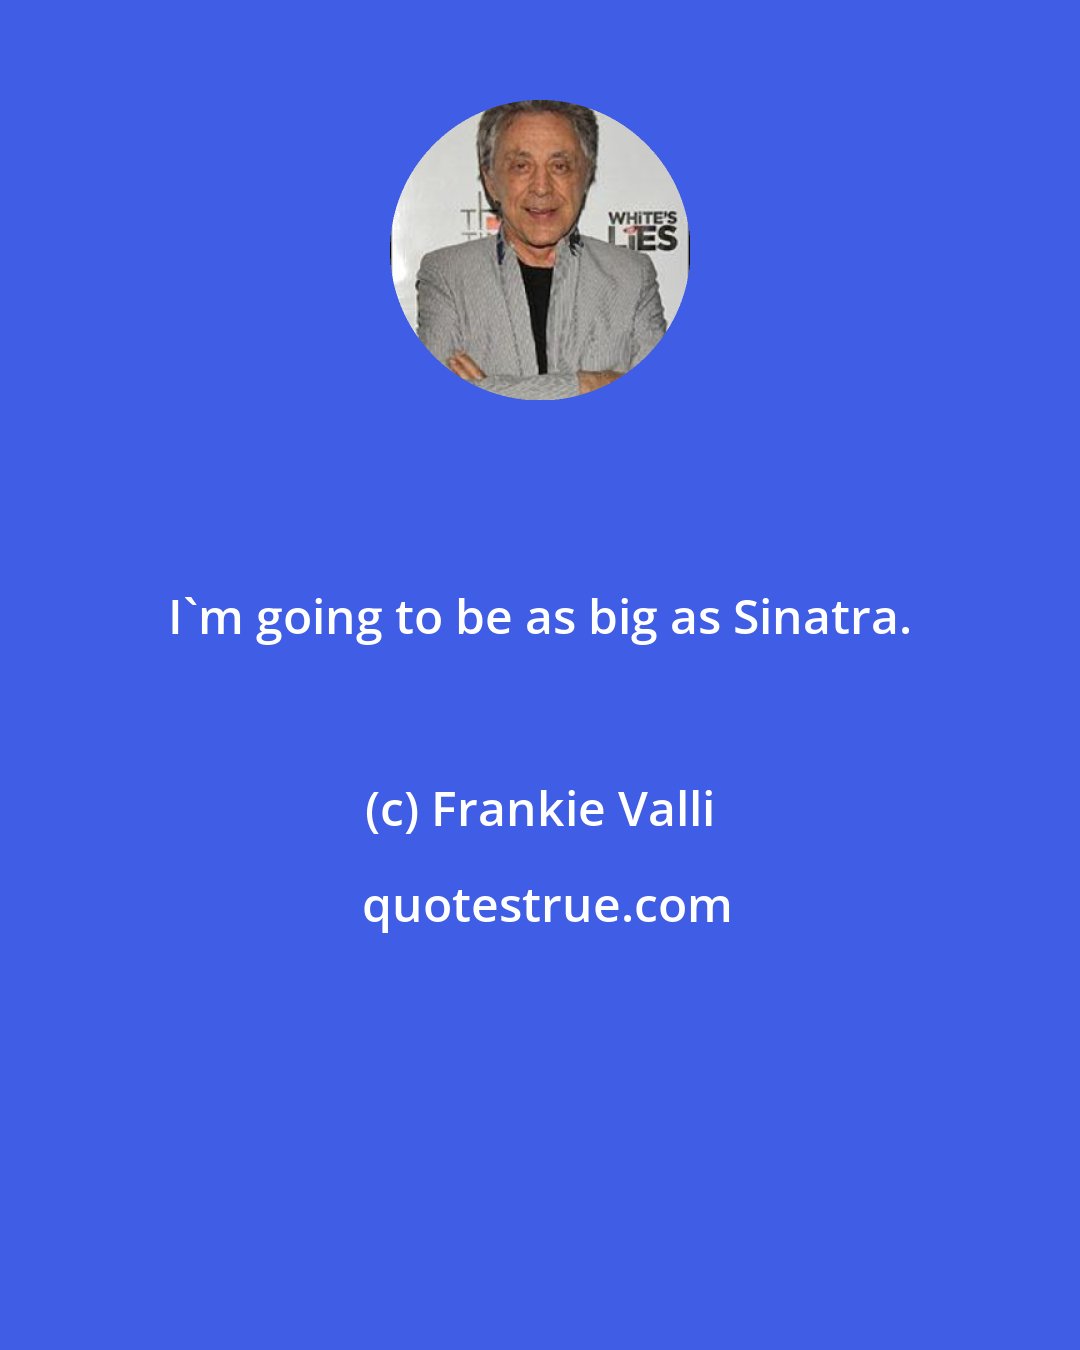 Frankie Valli: I'm going to be as big as Sinatra.